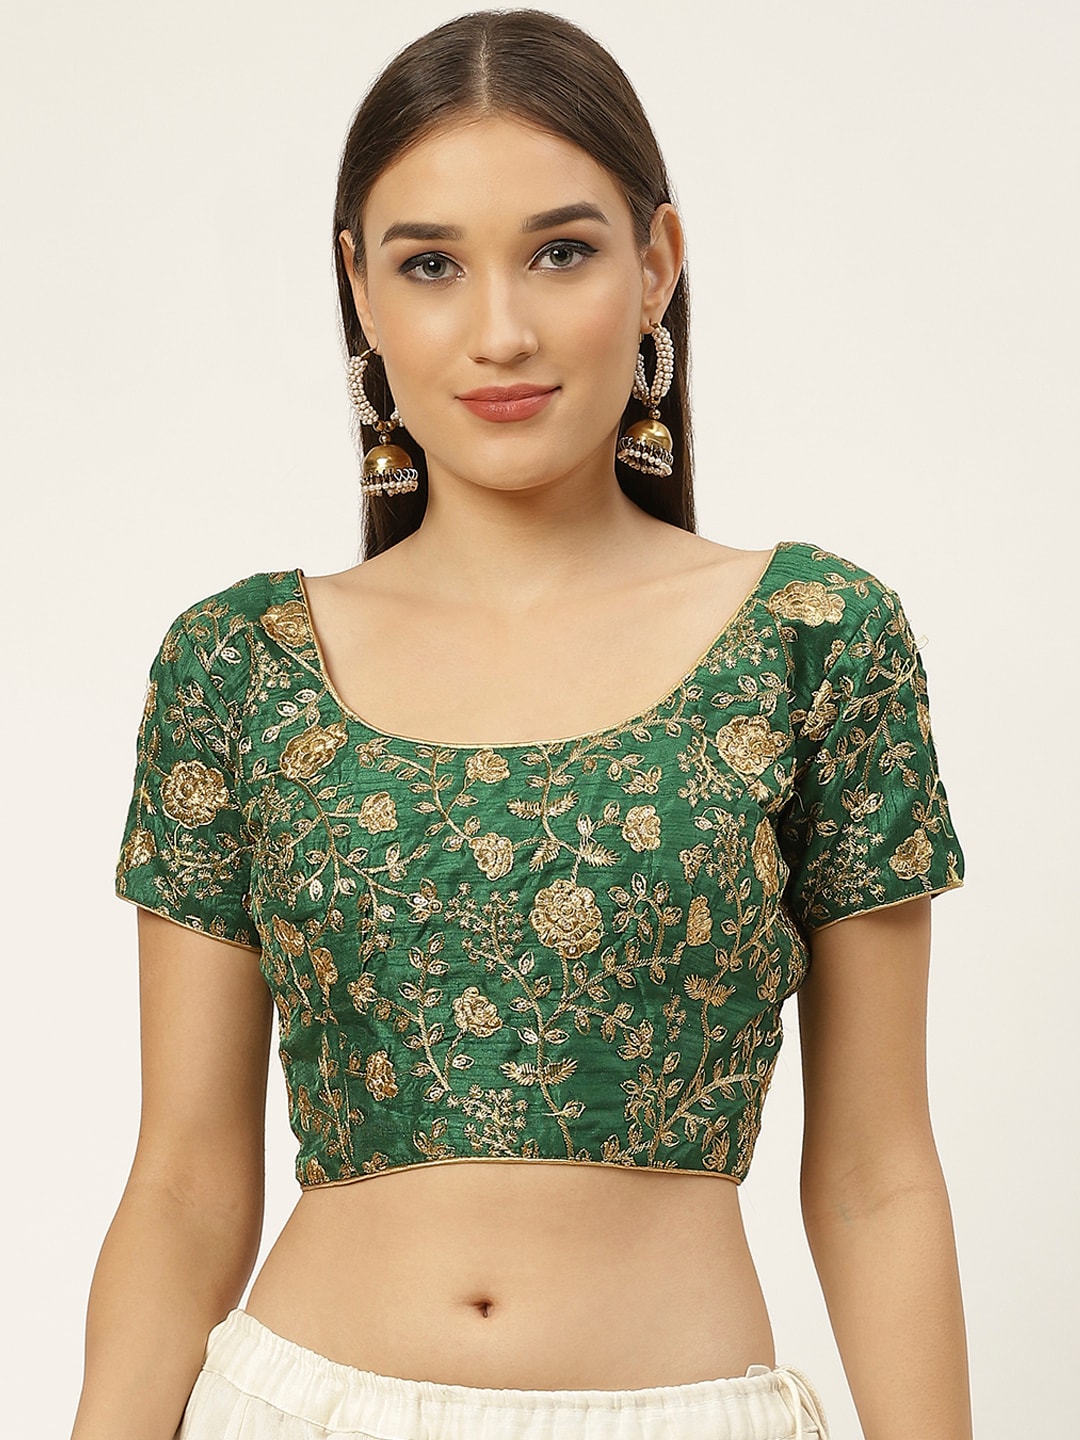 Studio Shringaar Women Green & Golden Embroidered Saree Blouse With Sequins Price in India